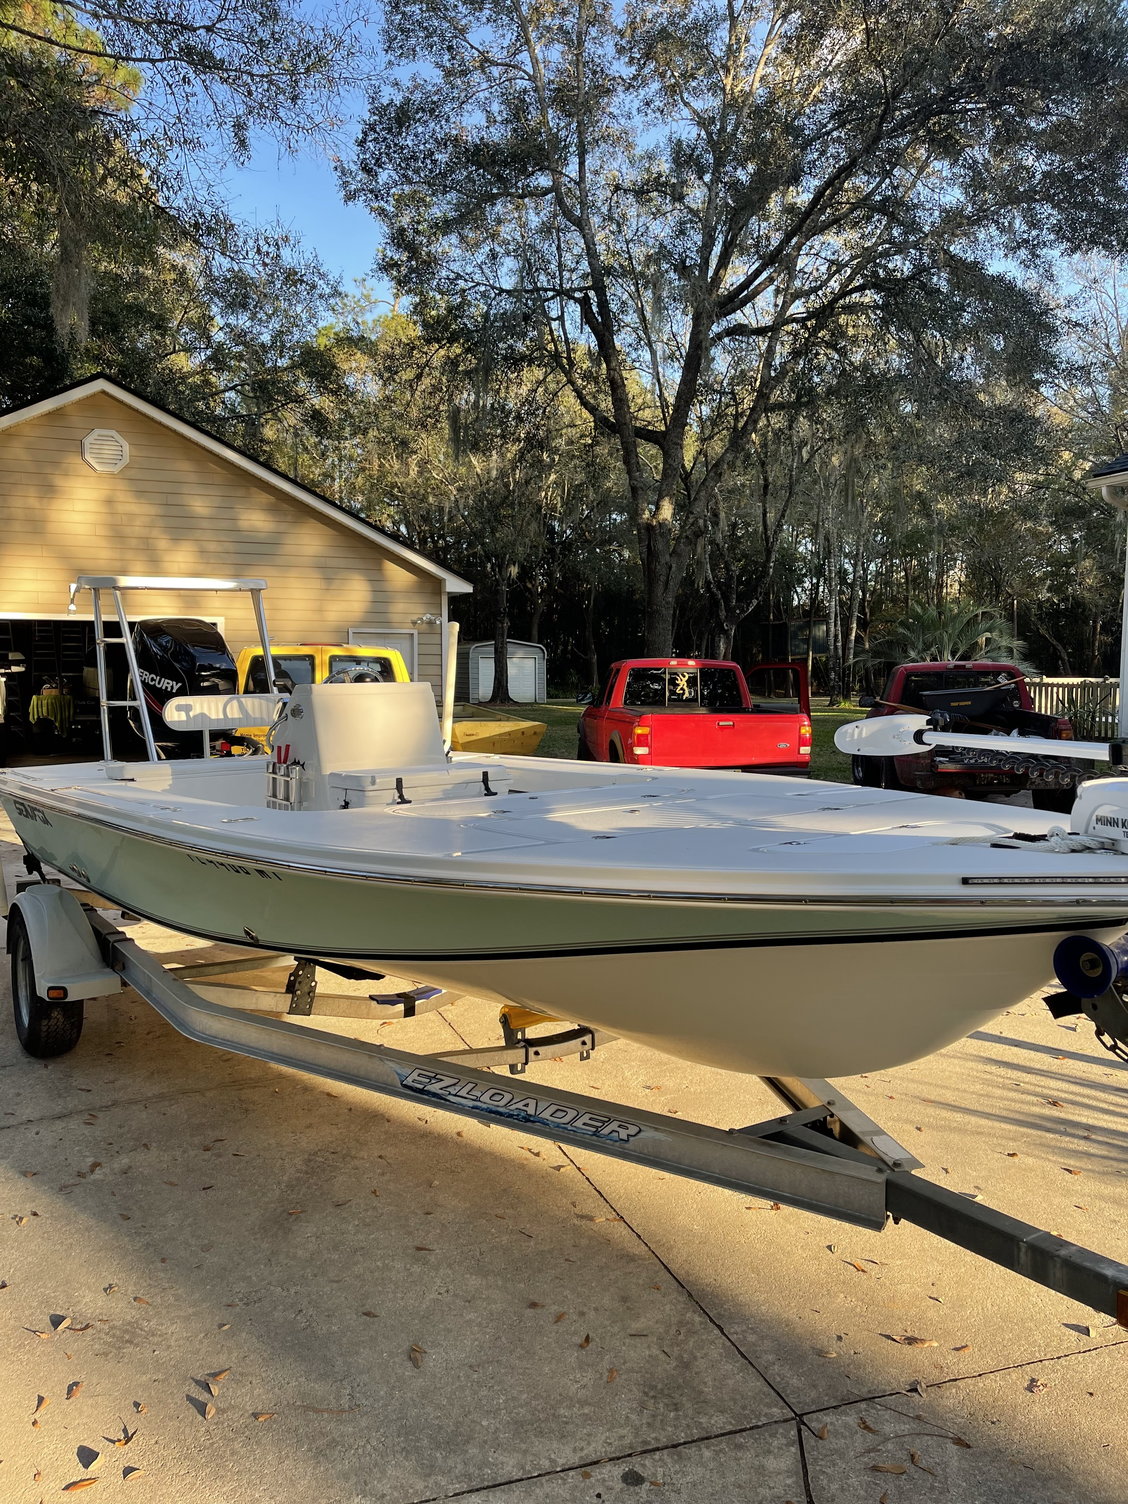 2005 seafox flats boat 200hp mercury - The Hull Truth - Boating and Fishing  Forum